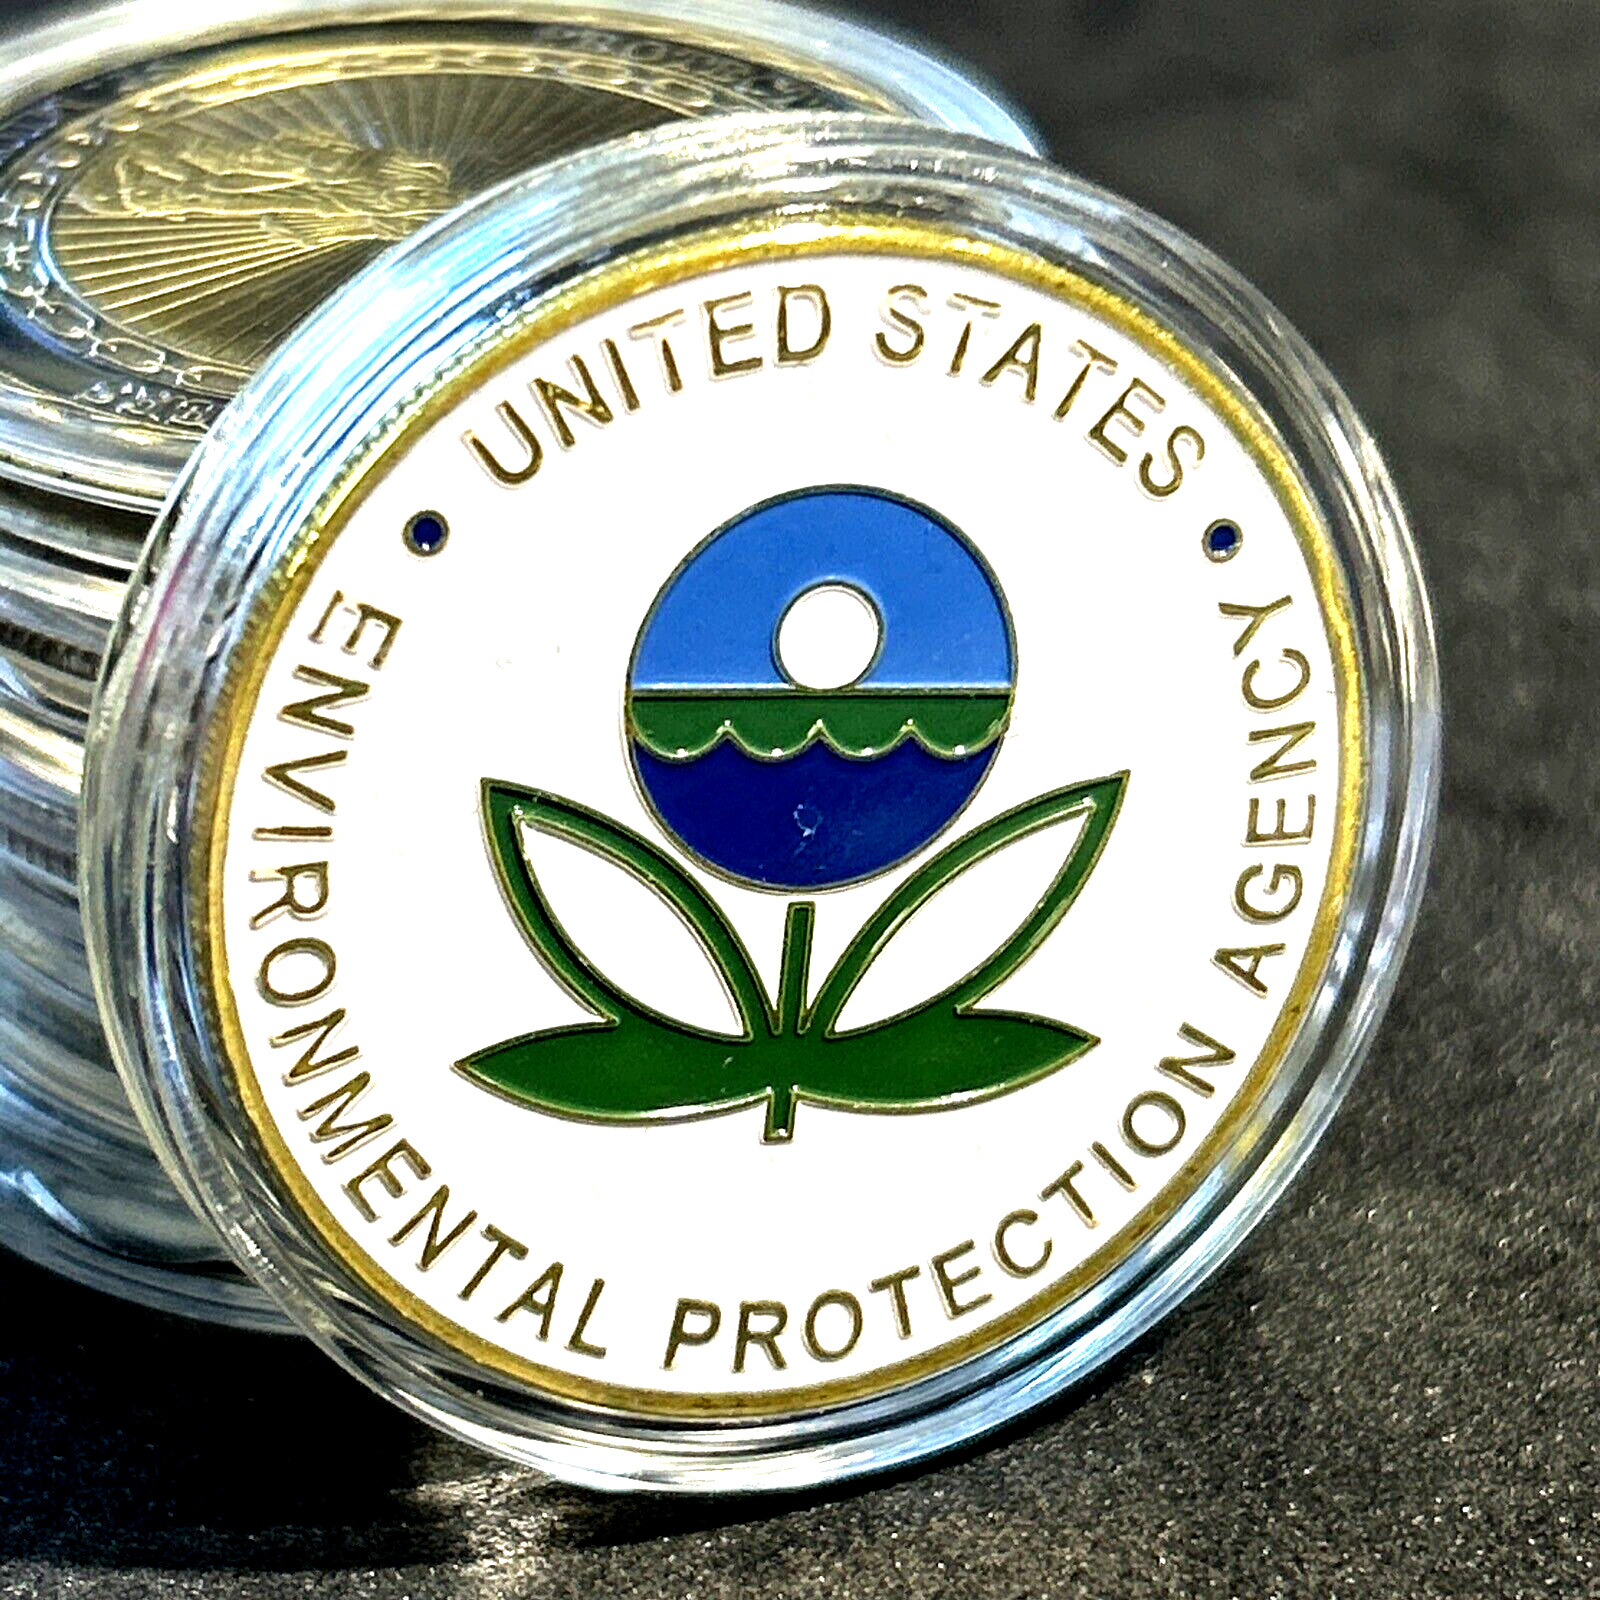 EPA US ENVIRONMENTAL PRTOECTION AGENCY US Government Challenge Coin NEW